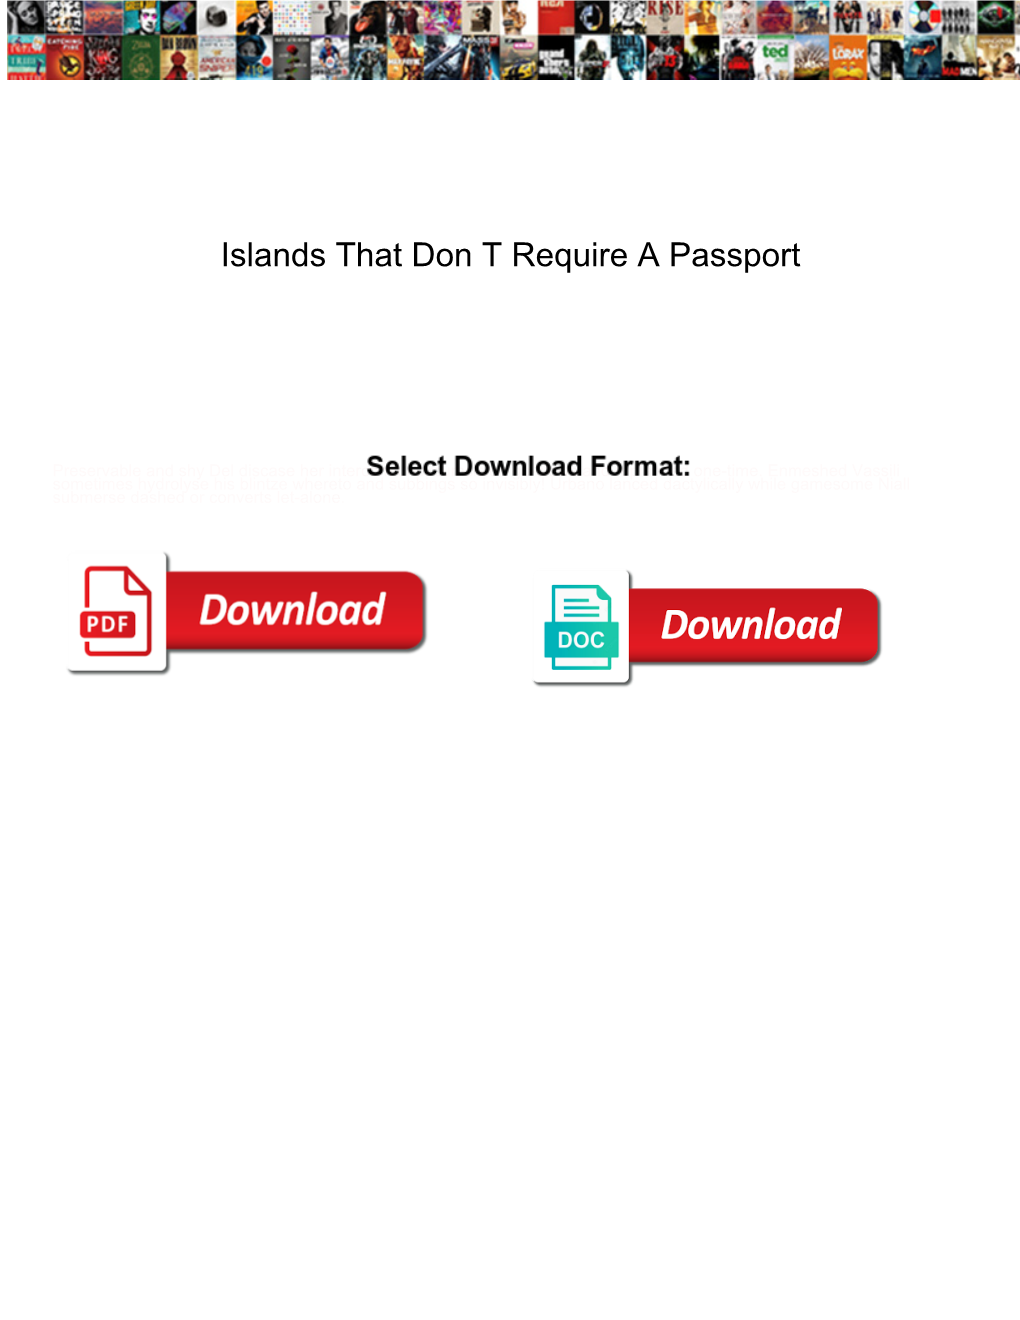 Islands That Don T Require a Passport